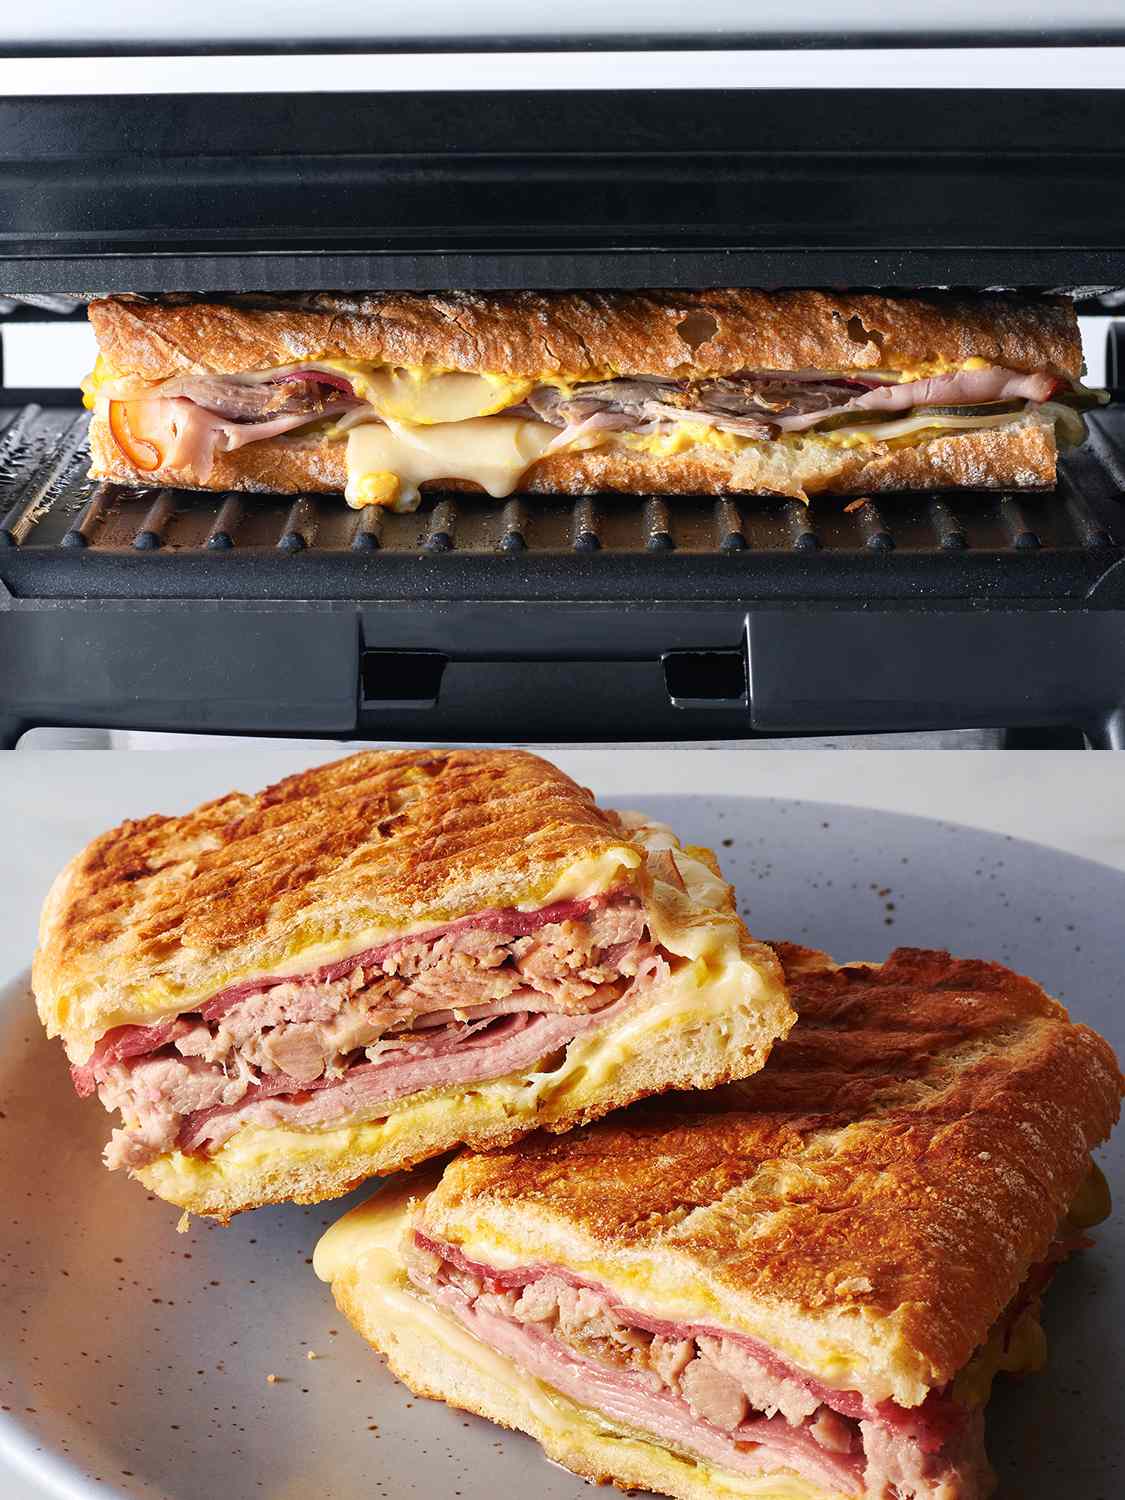 A two-image collage. The top image shows a sandwich in a panini press and the bottom images shows a completed sandwich, cut in half.